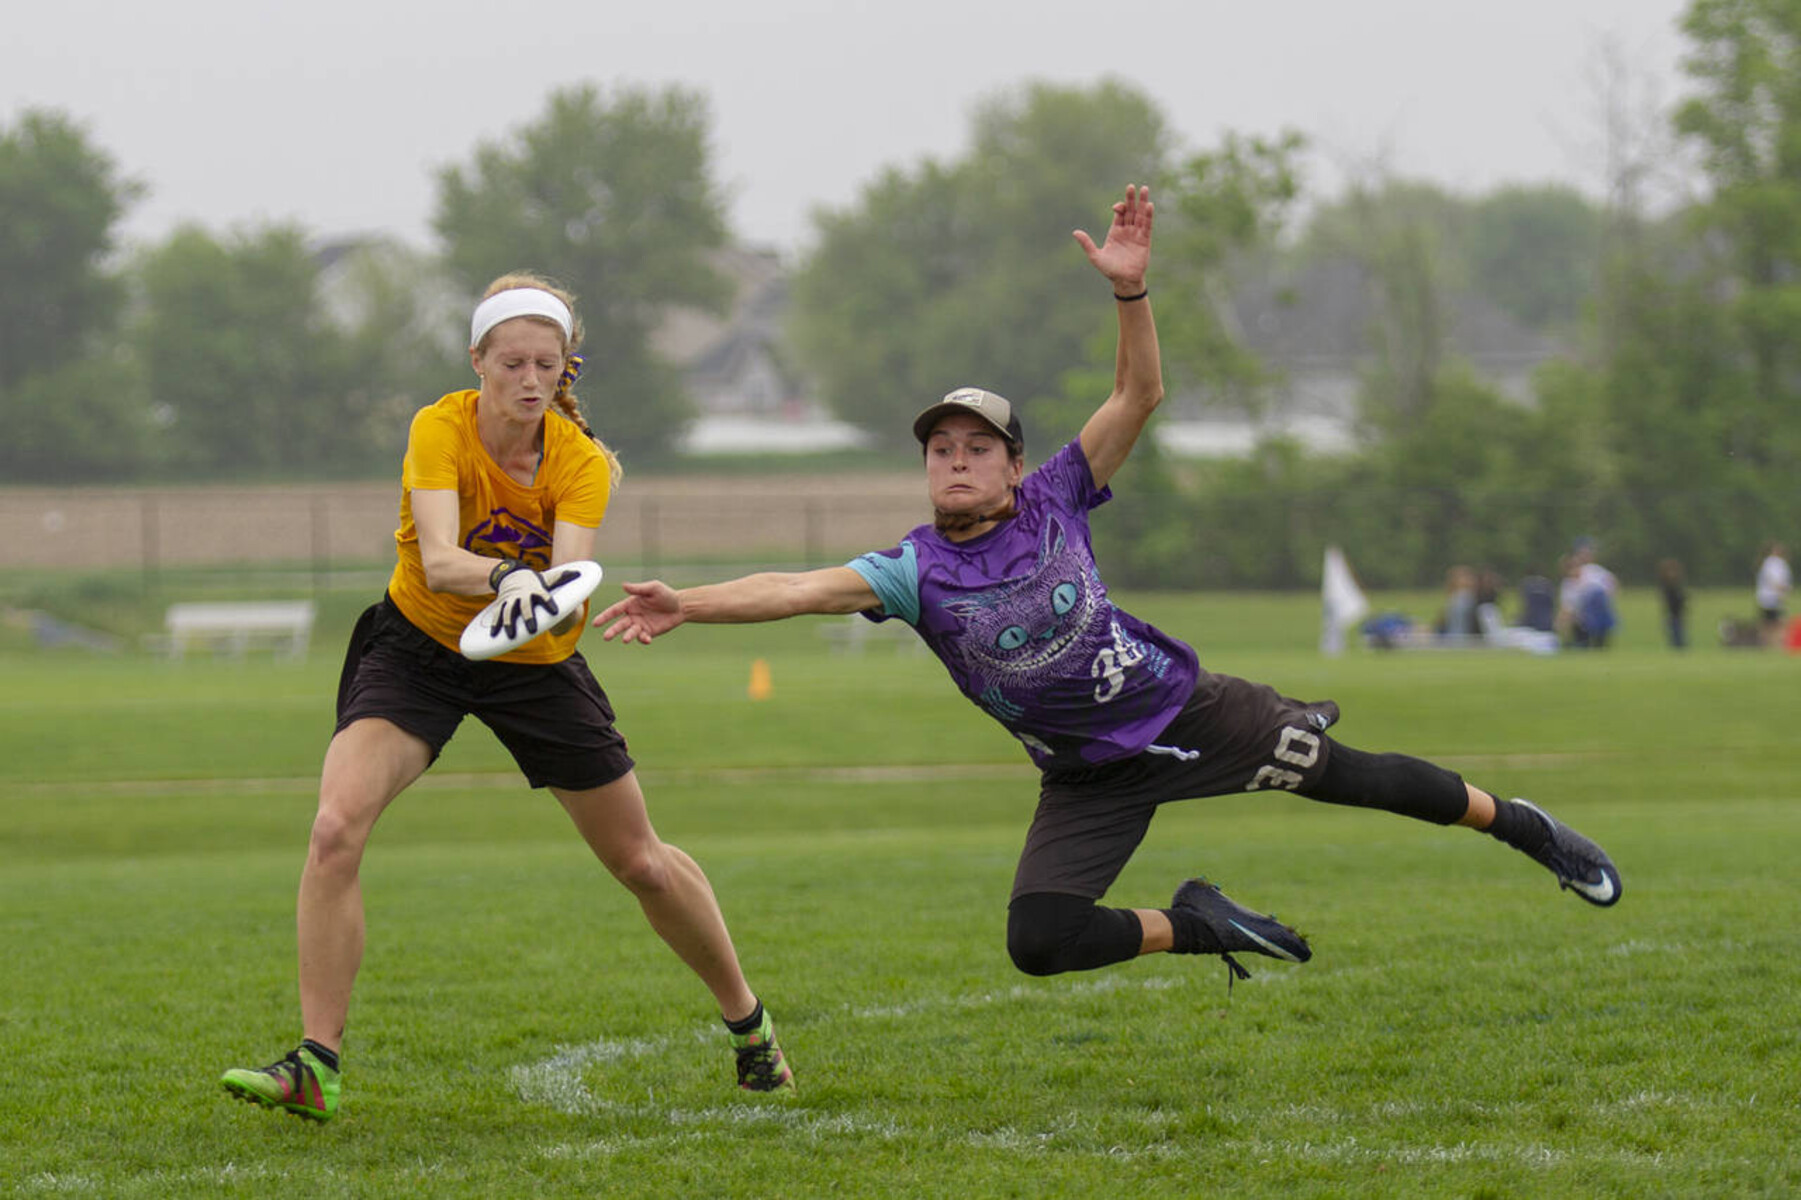 11 Facts About Frisbee Tournament